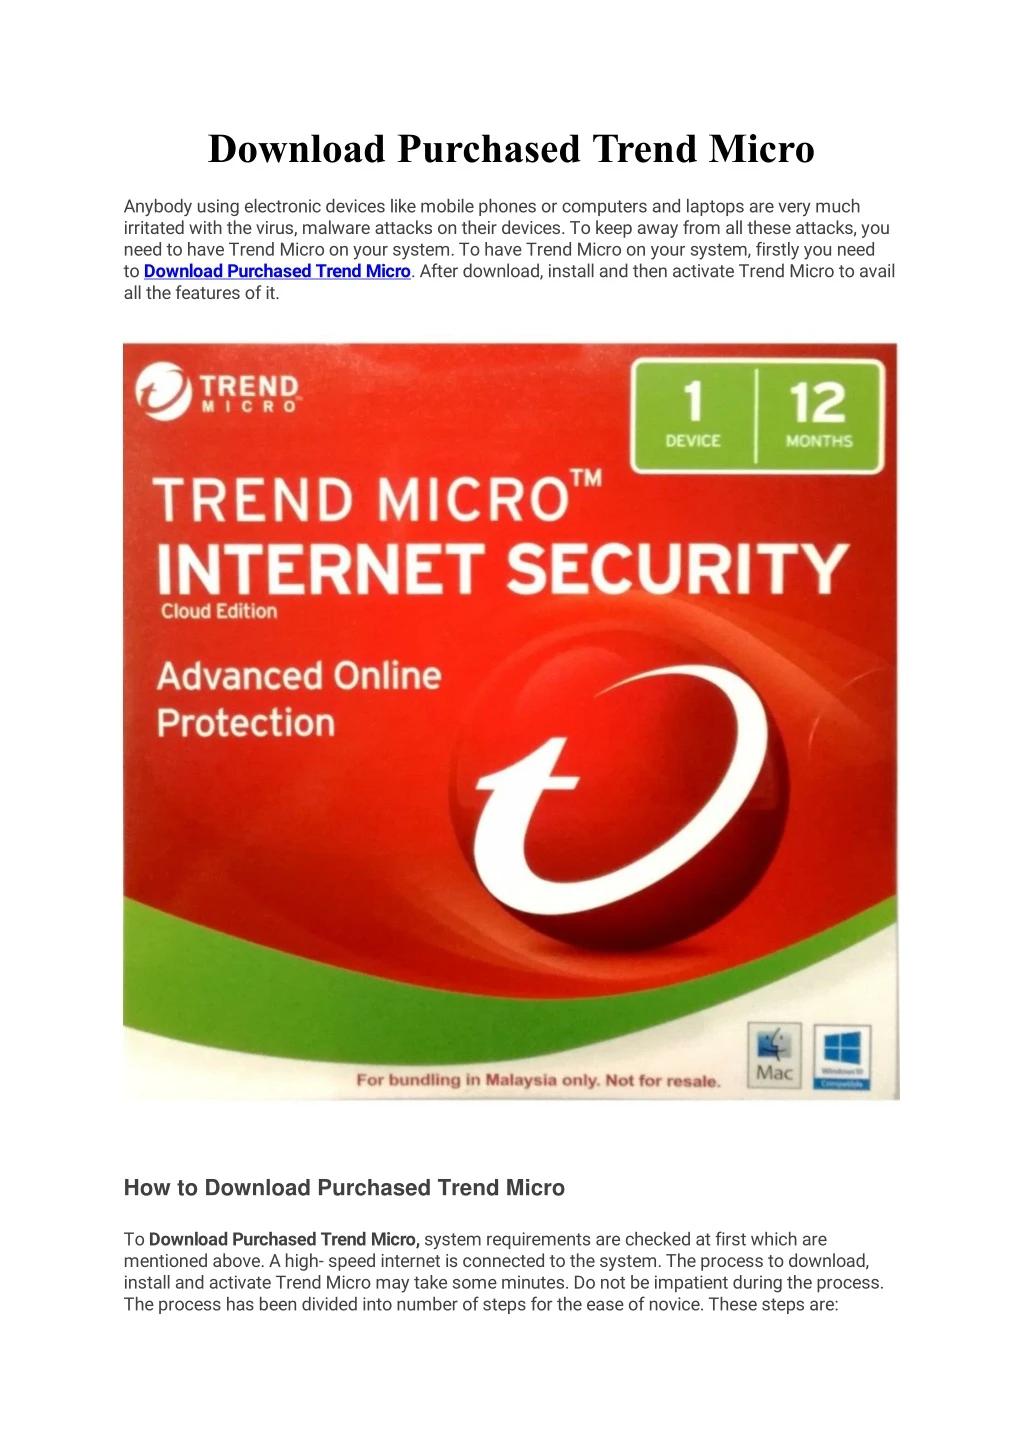 download purchased trend micro n.